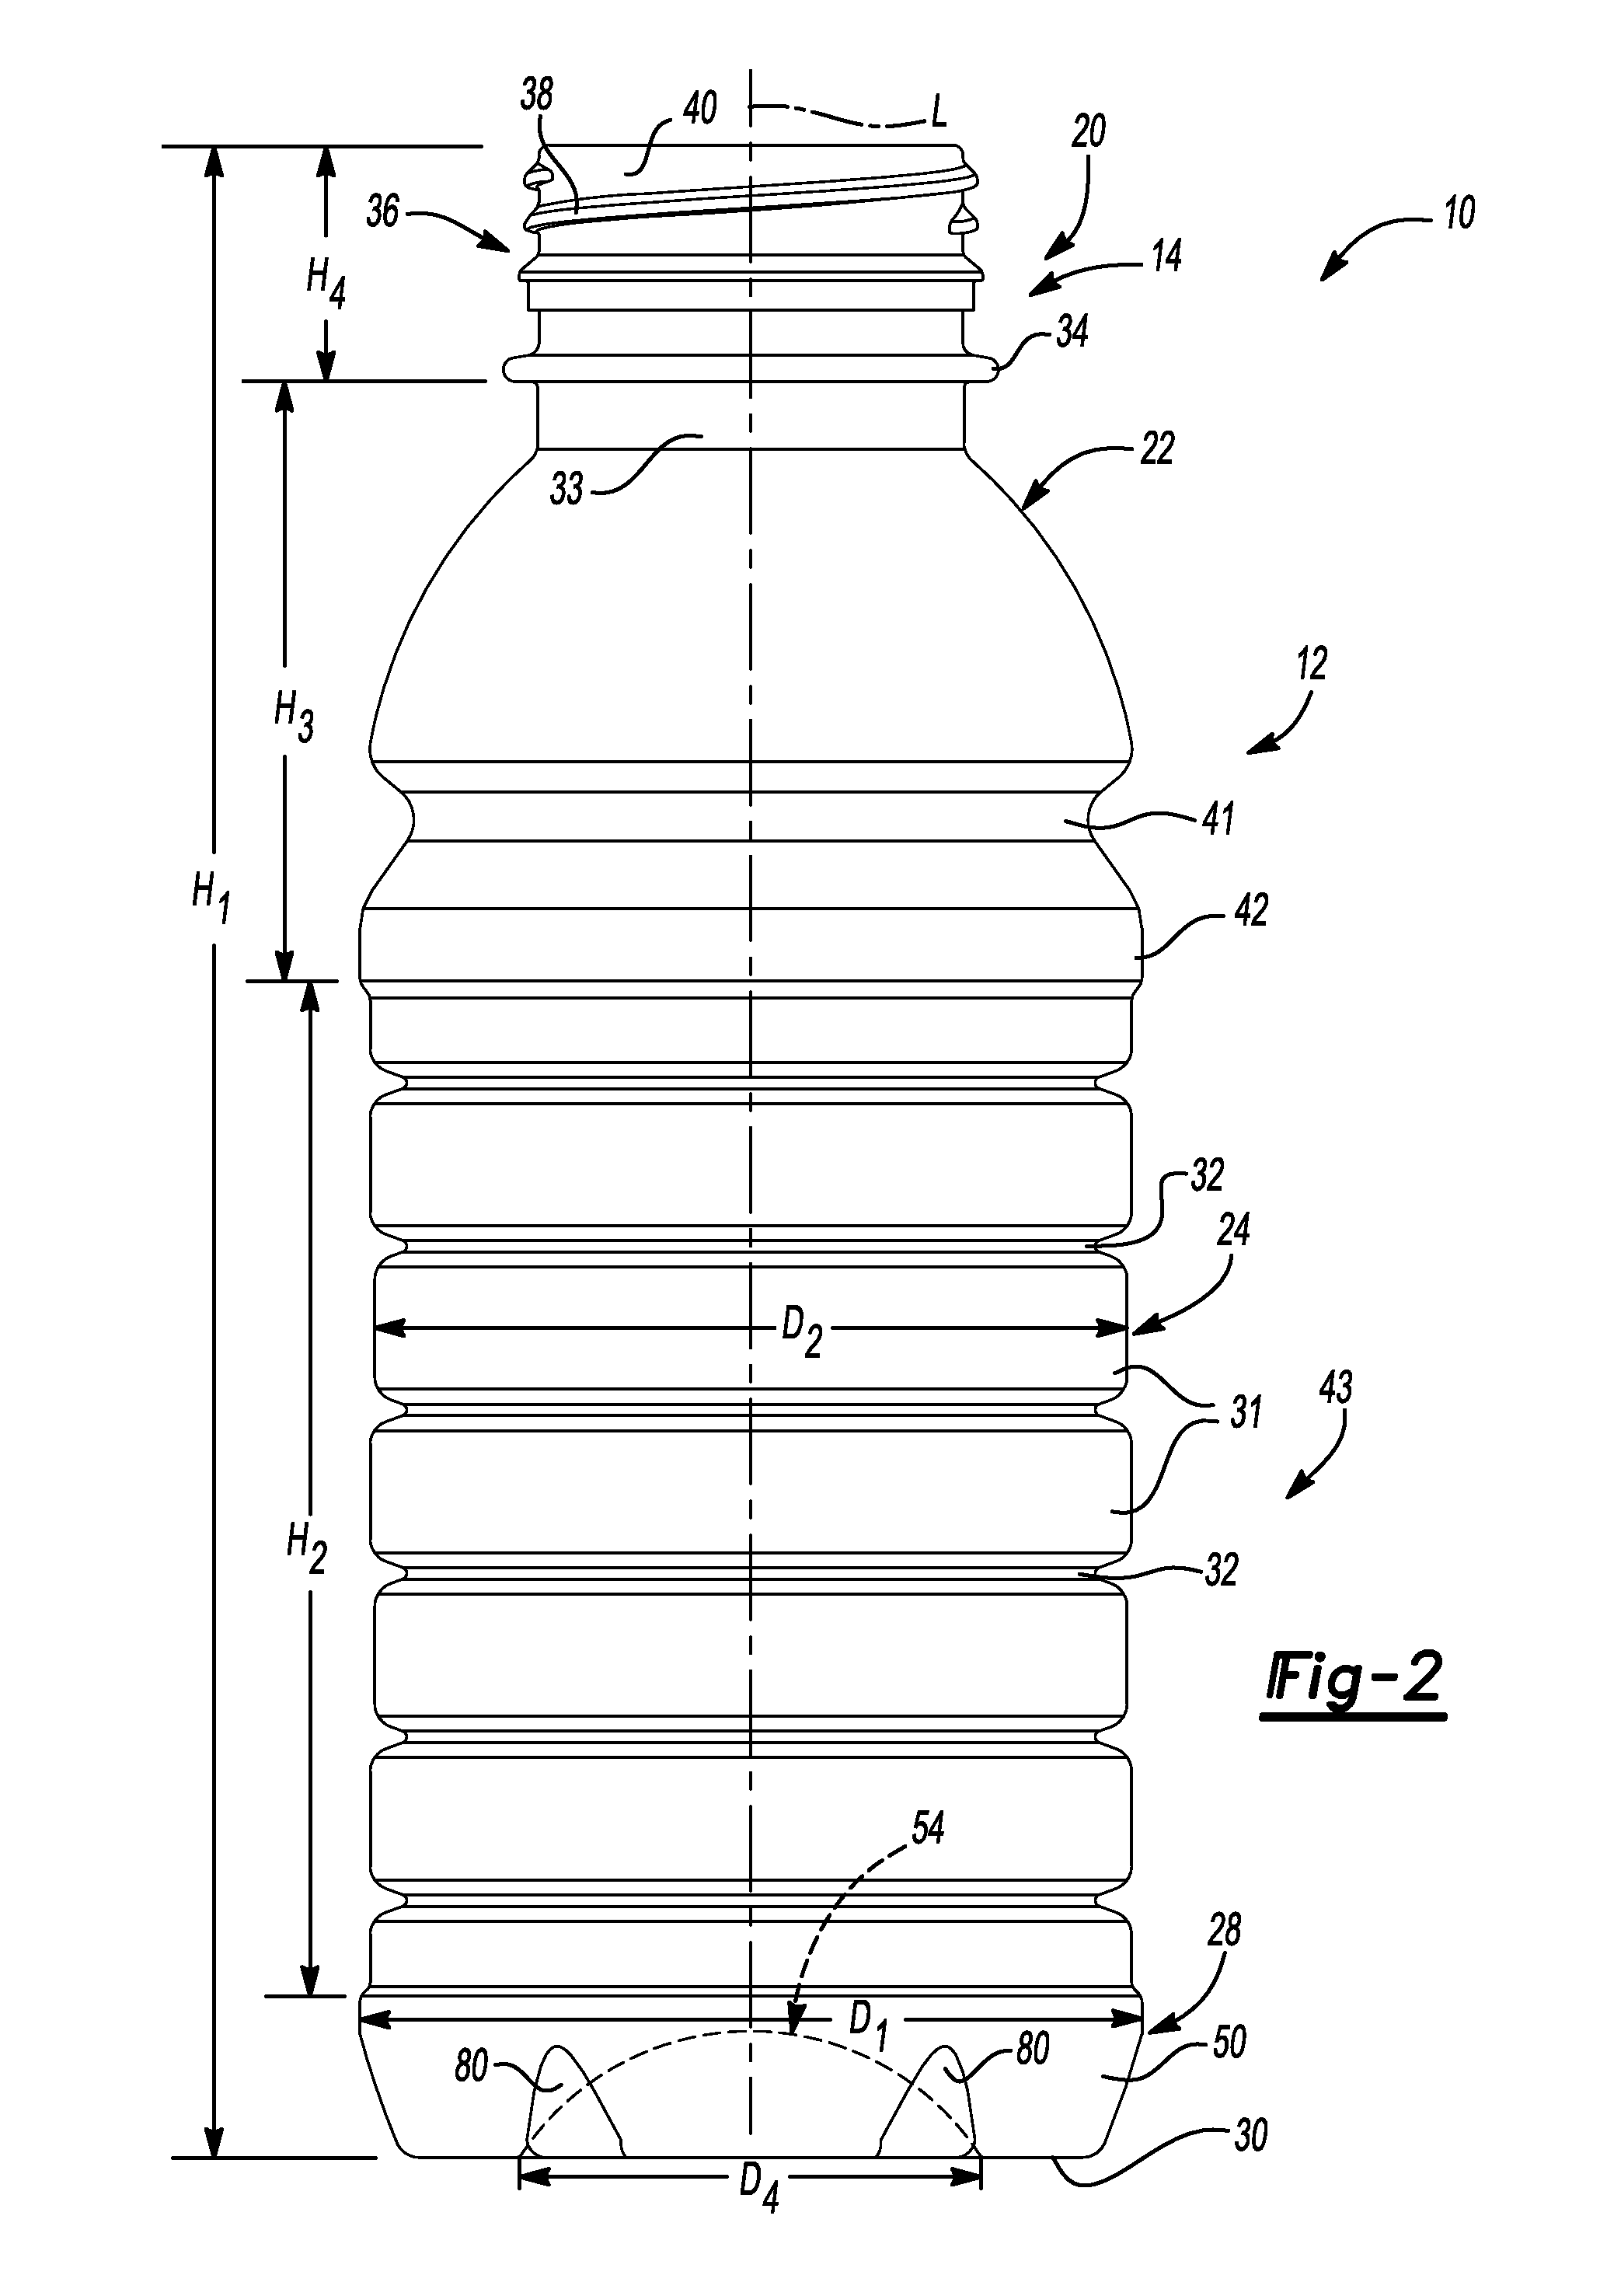 Hot-fill container having movable ribs for accommodating vacuum forces